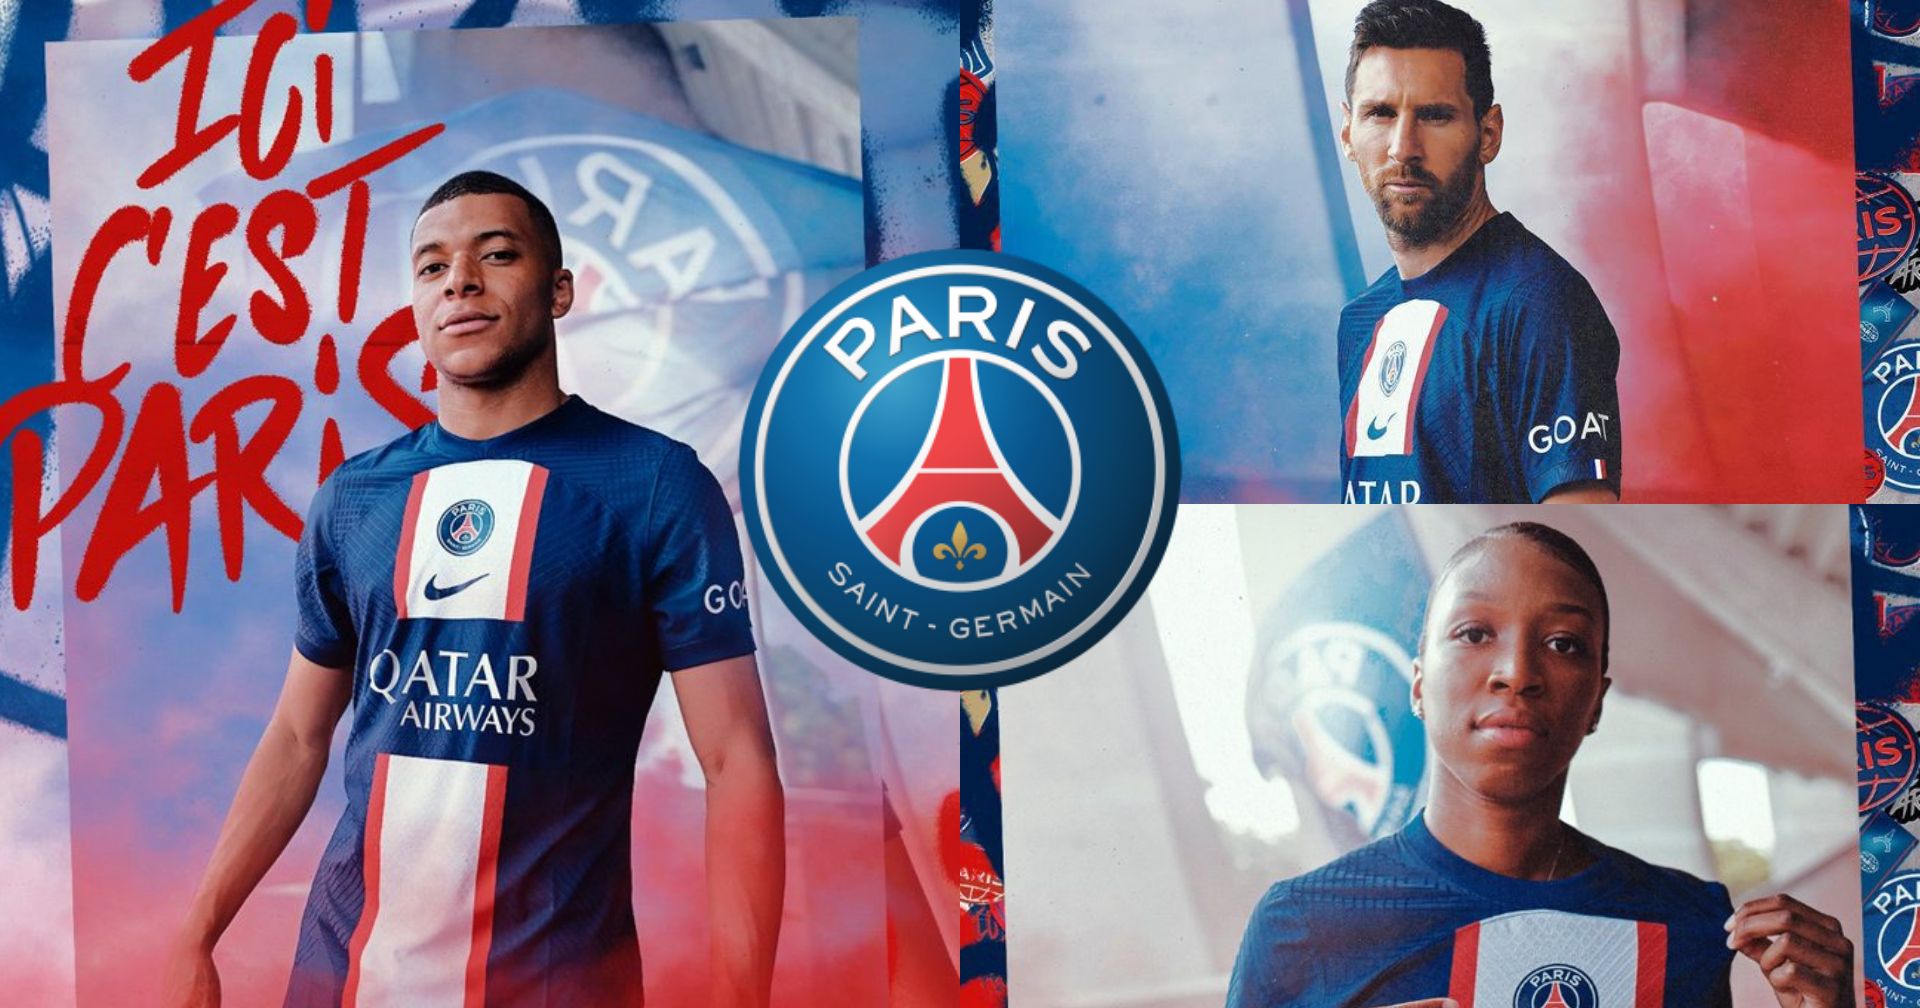 PSG launch new GOAT kit featuring Kylian Mbappe & Lionel Messi